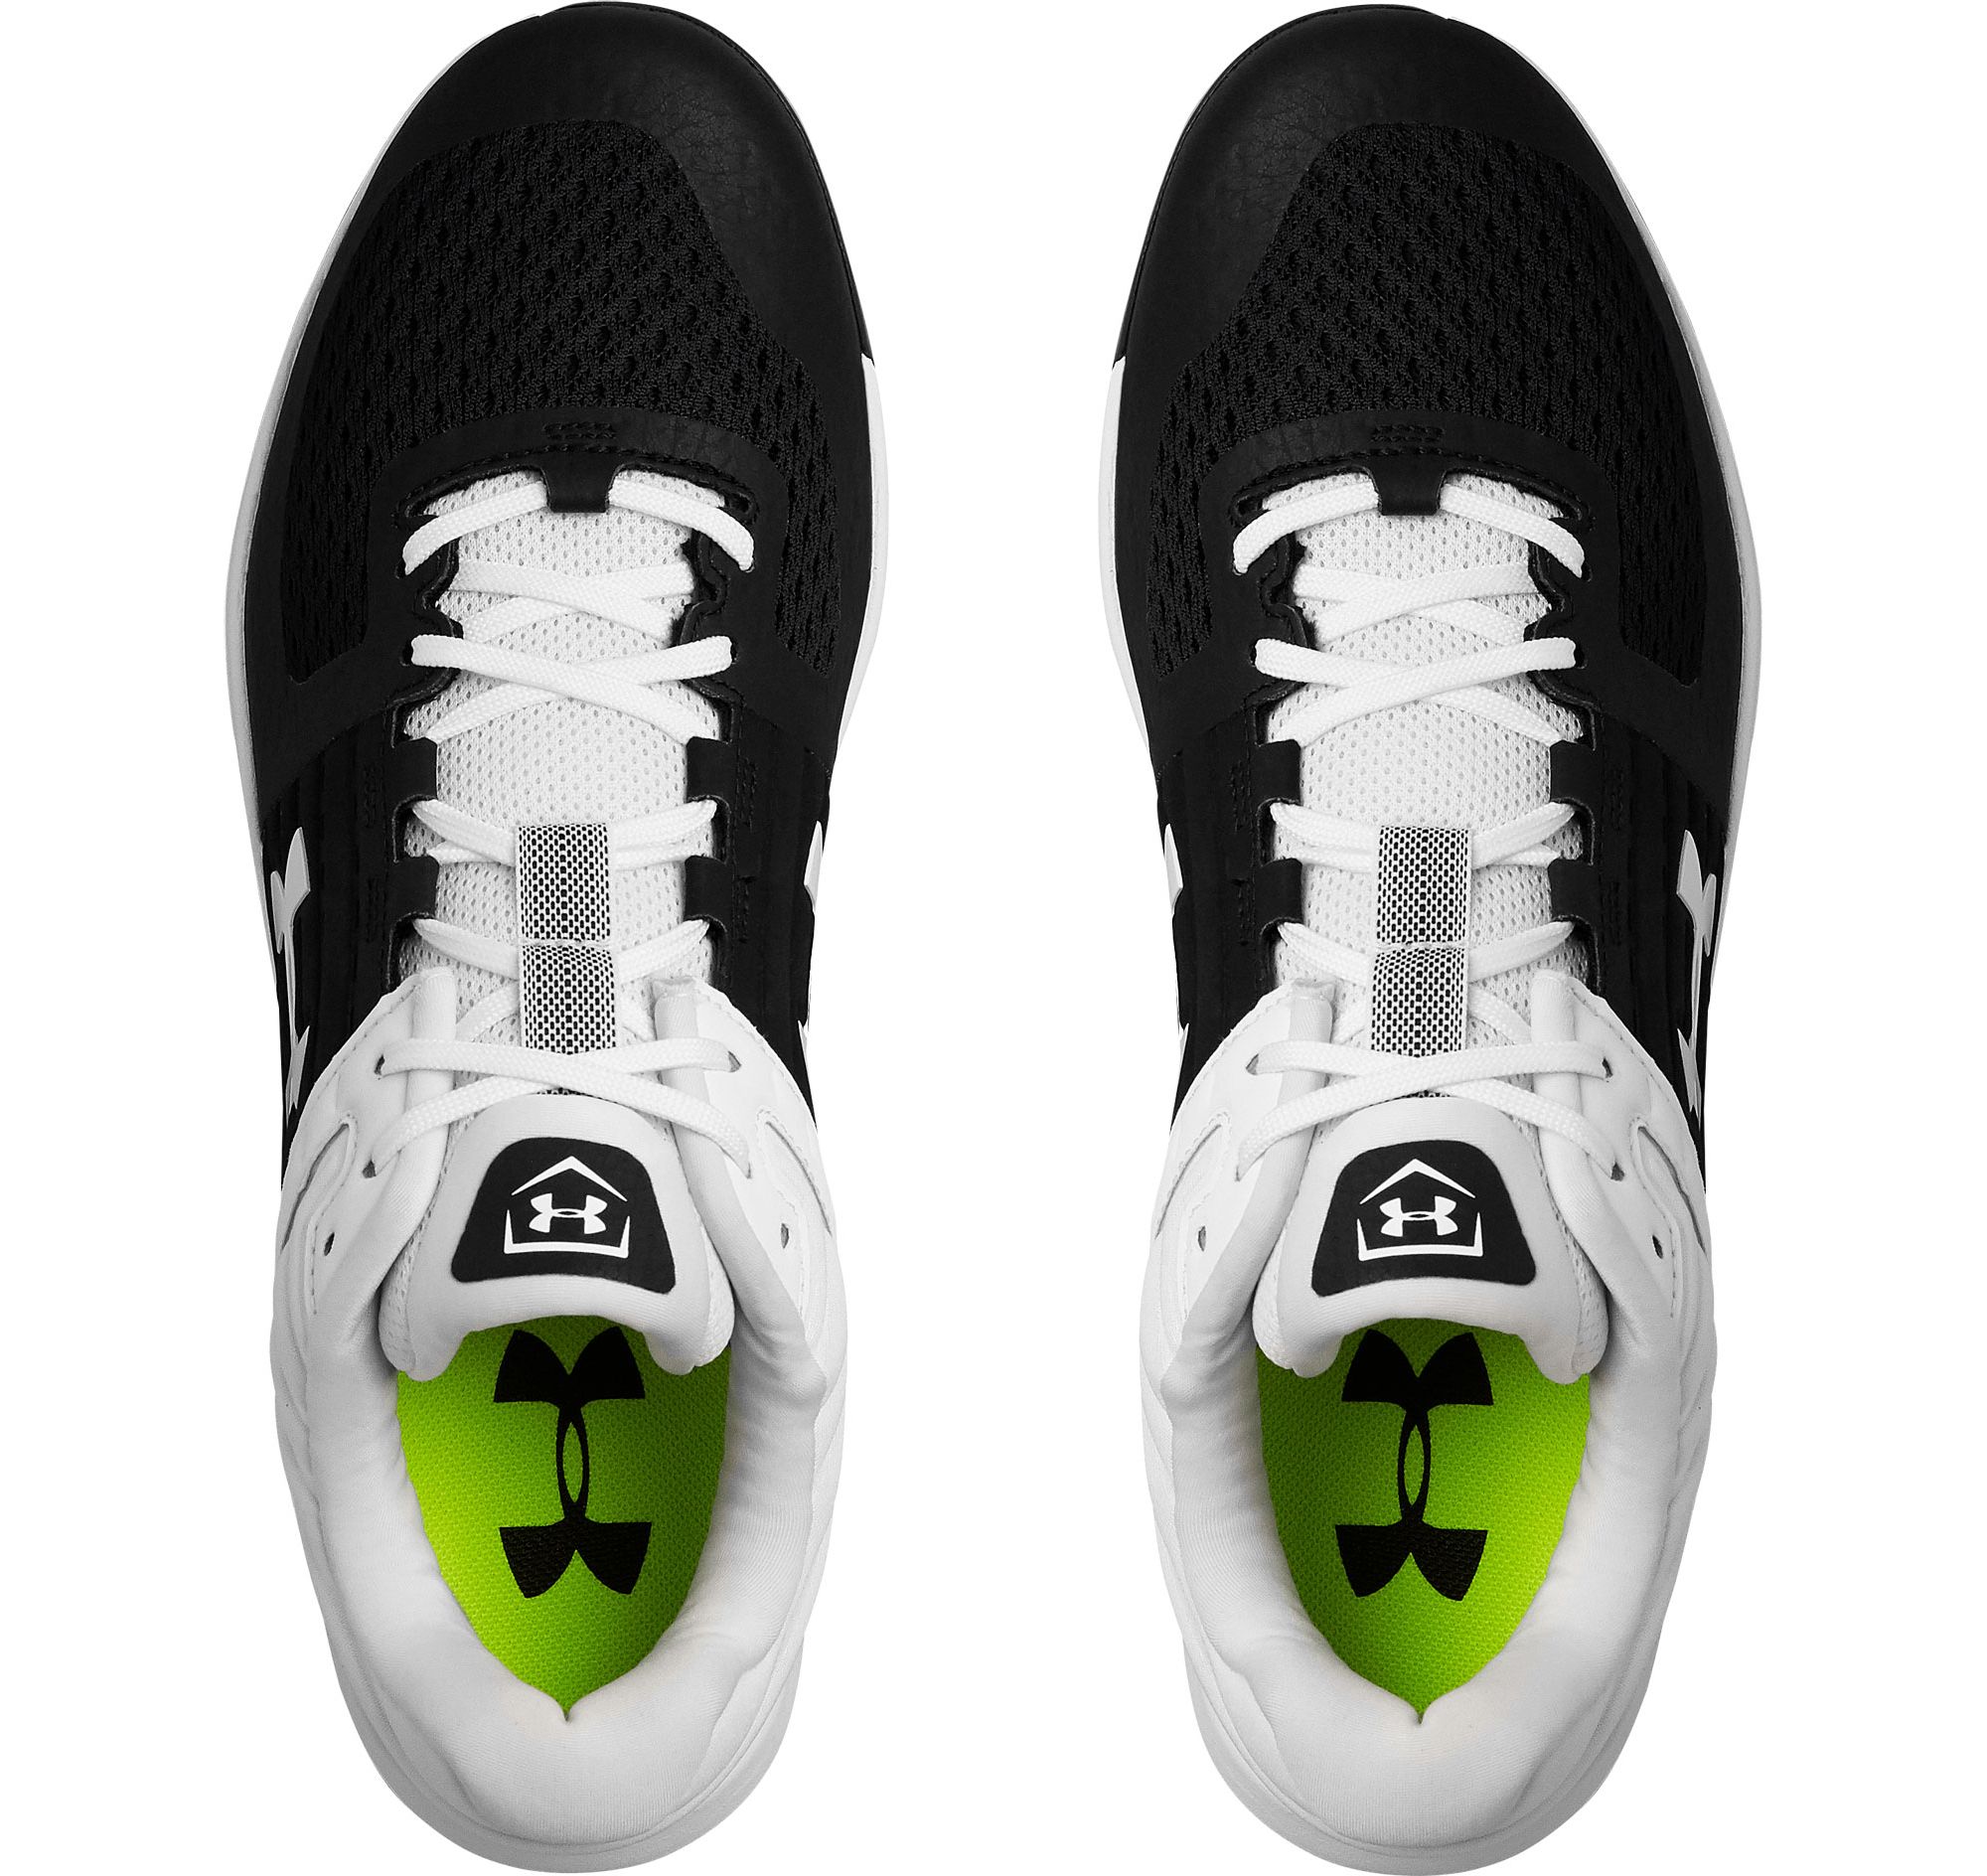 Under Armour Yard Low ST | Midway Sports.